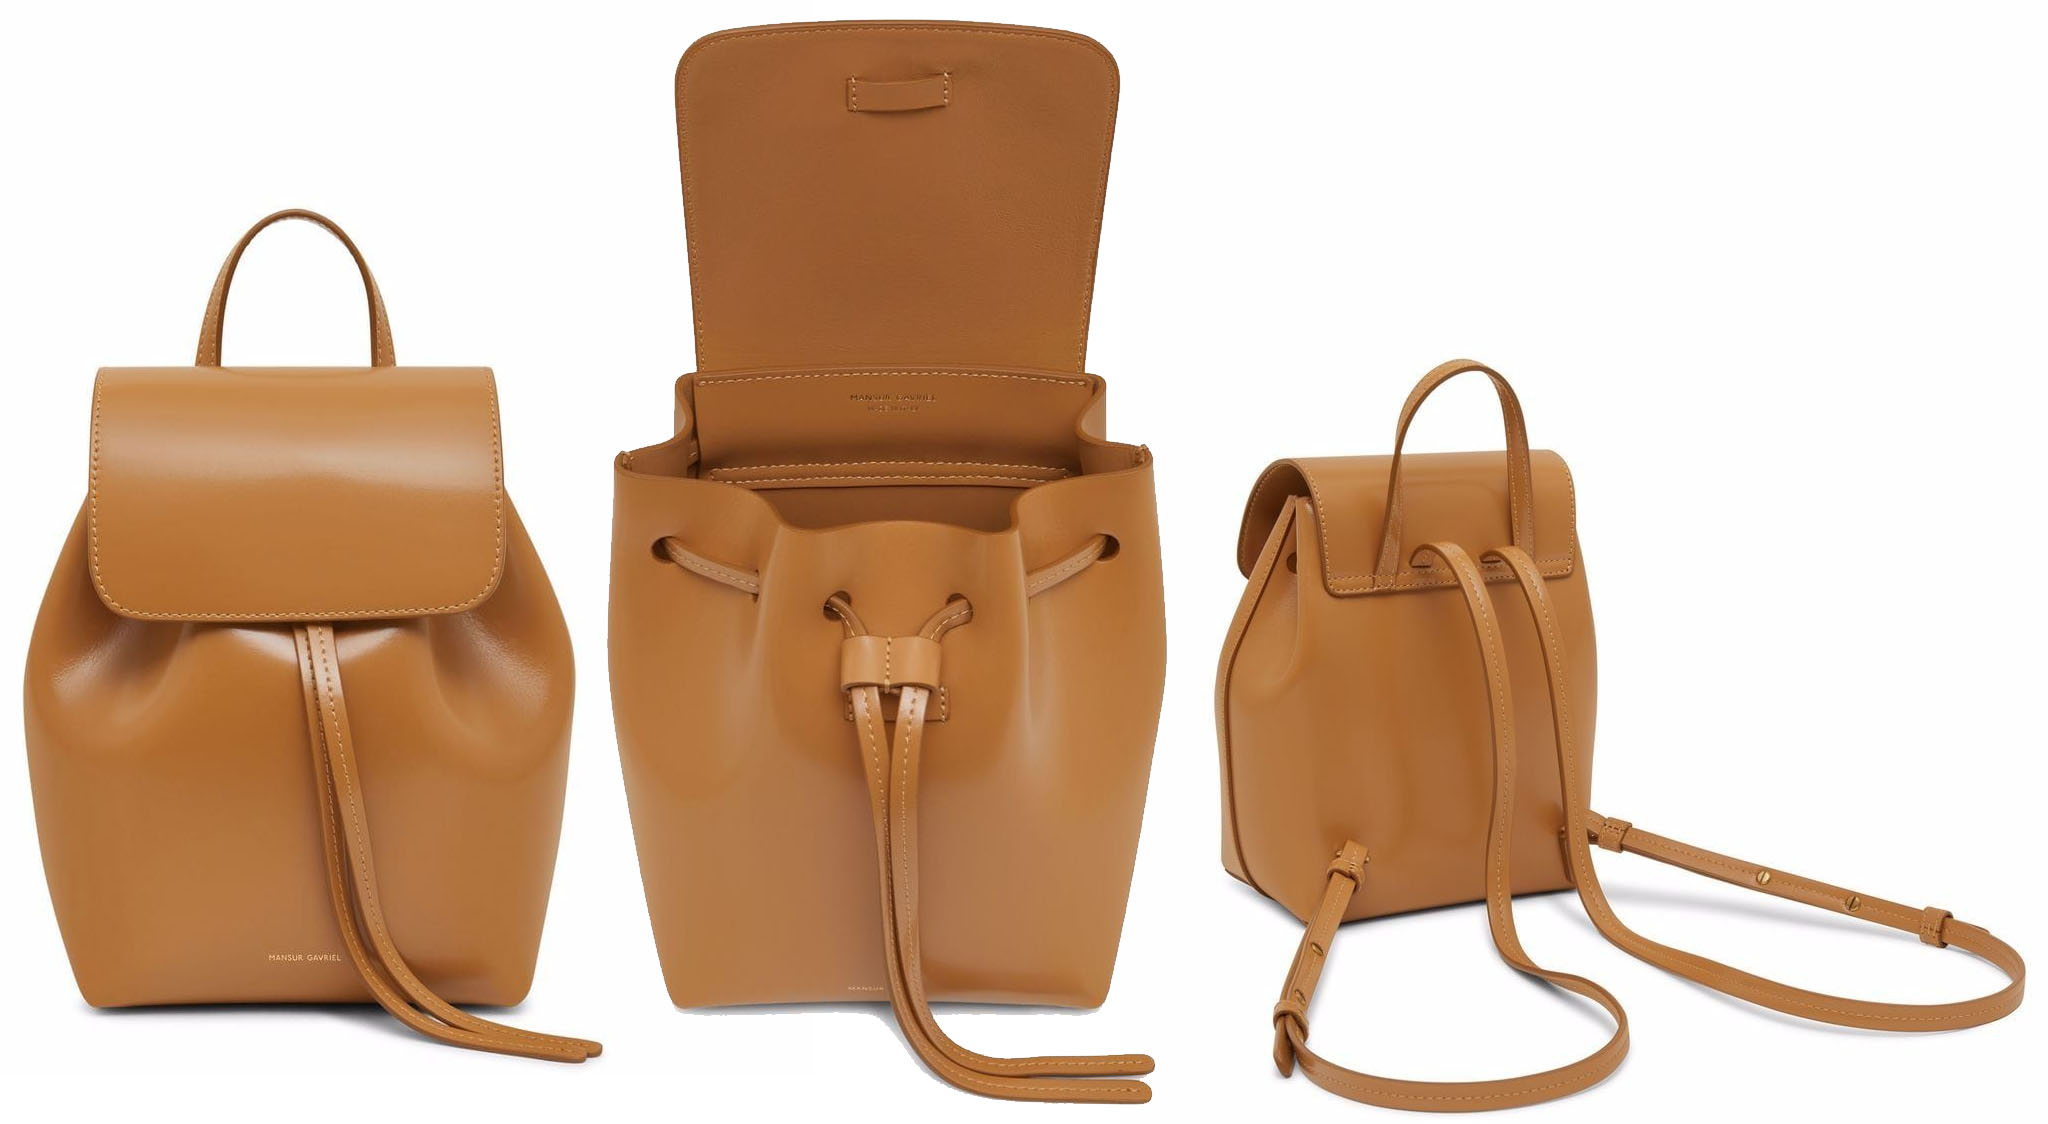 Add an elegant vintage feel to any outfit with Mansur Gavriel's Mini Lady backpack, featuring a fold-over top with a drawstring fastening and an understated embossed logo on the front